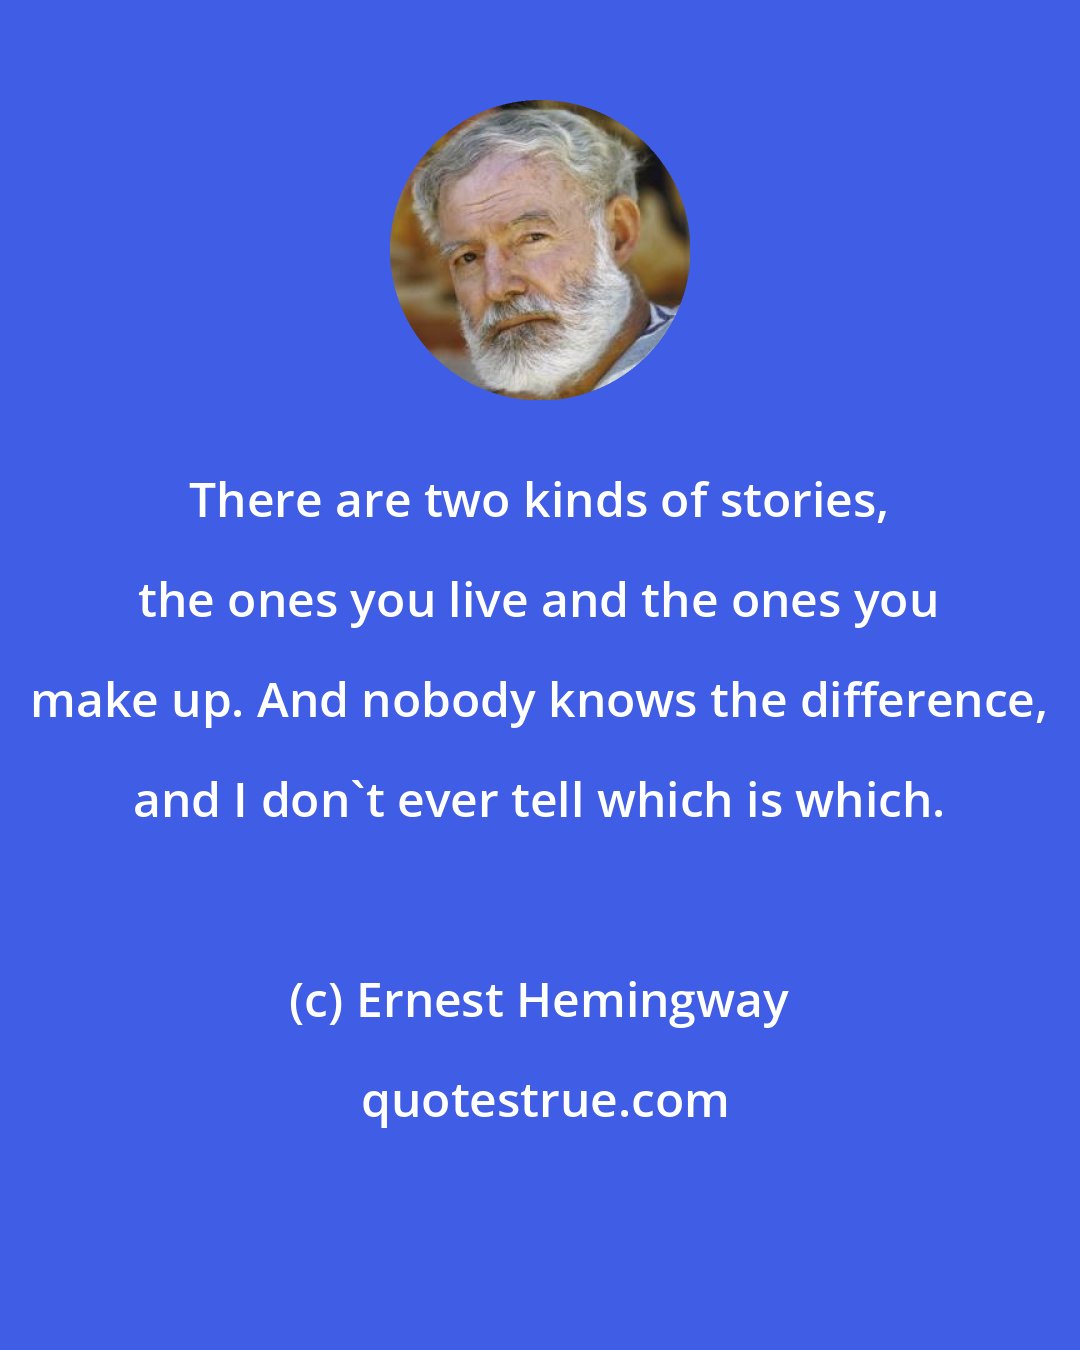 Ernest Hemingway: There are two kinds of stories, the ones you live and the ones you make up. And nobody knows the difference, and I don't ever tell which is which.